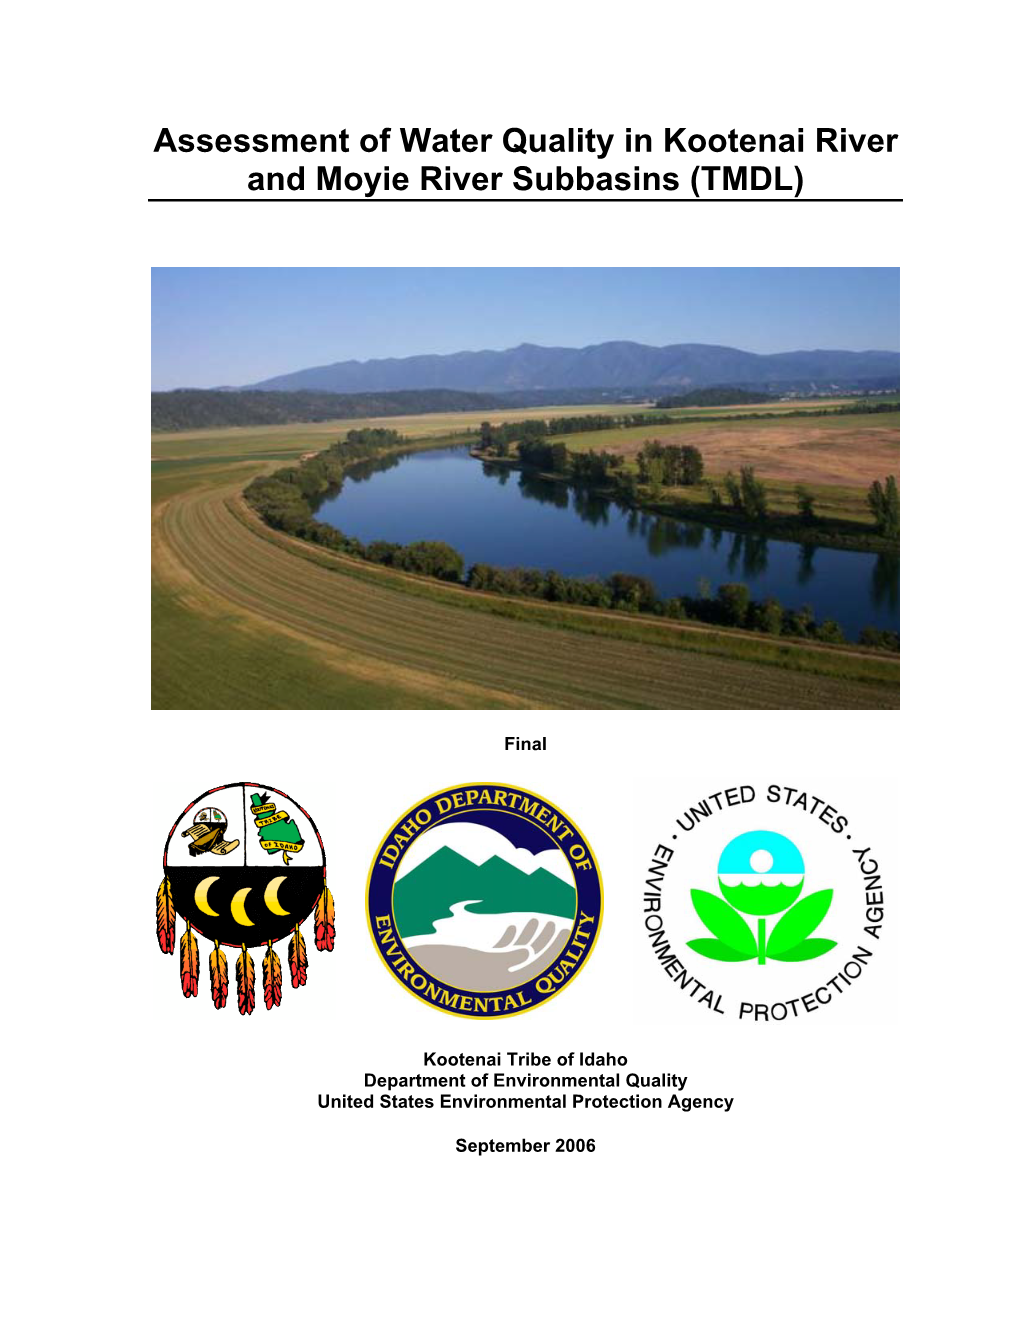 Assessment of Water Quality in Kootenai River and Moyie River Subbasins (TMDL)